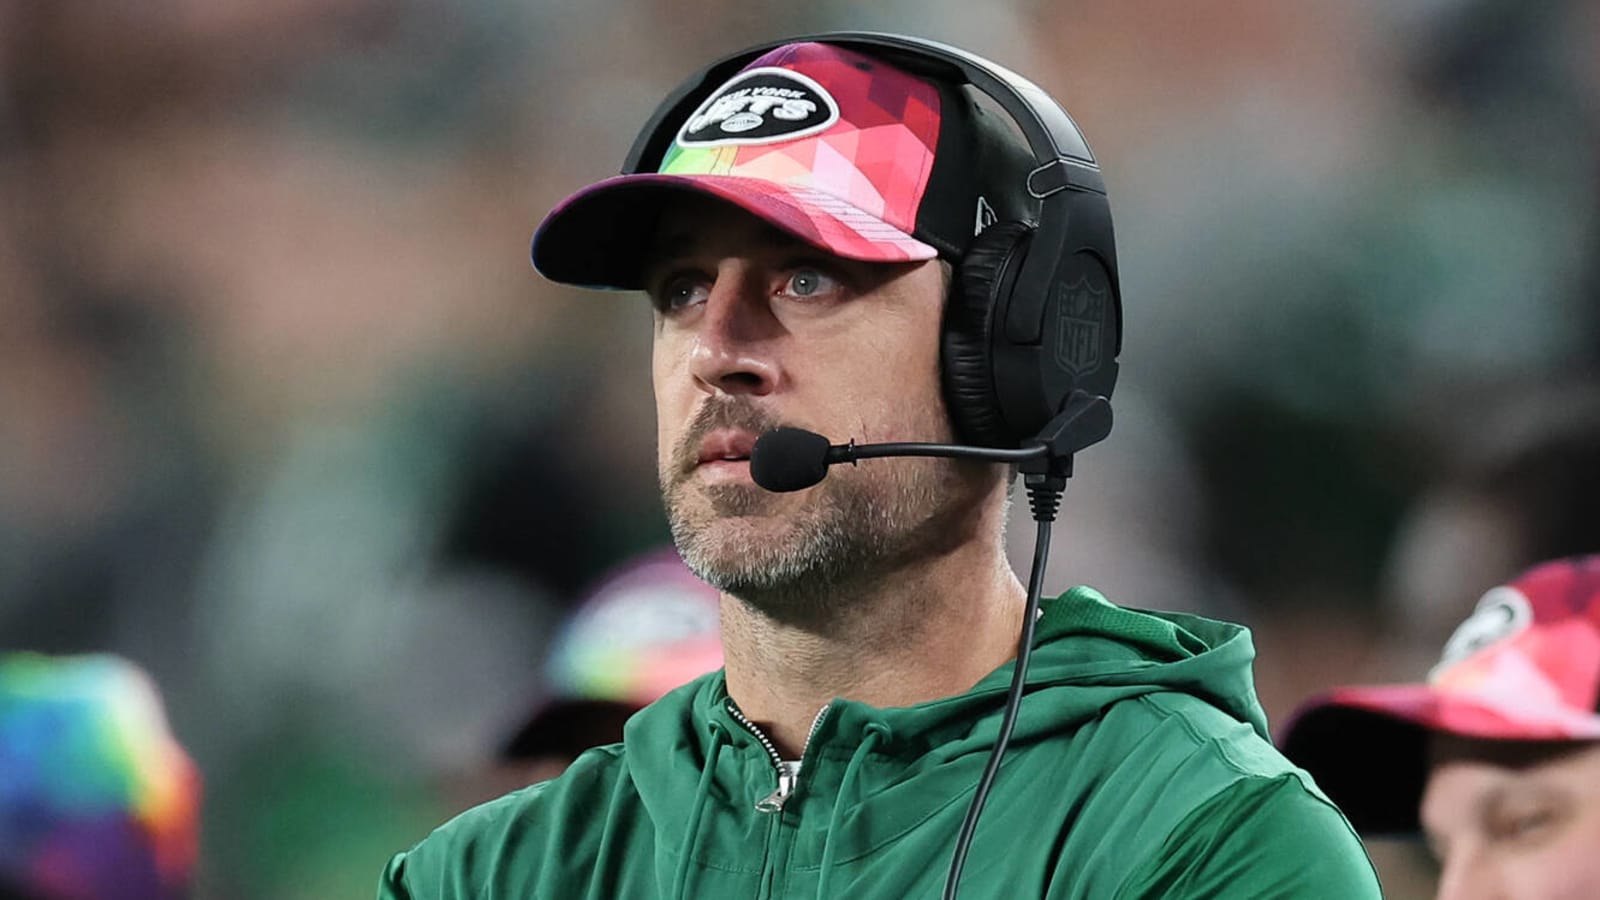 Injury expert has shocking return prediction about Jets' Aaron Rodgers